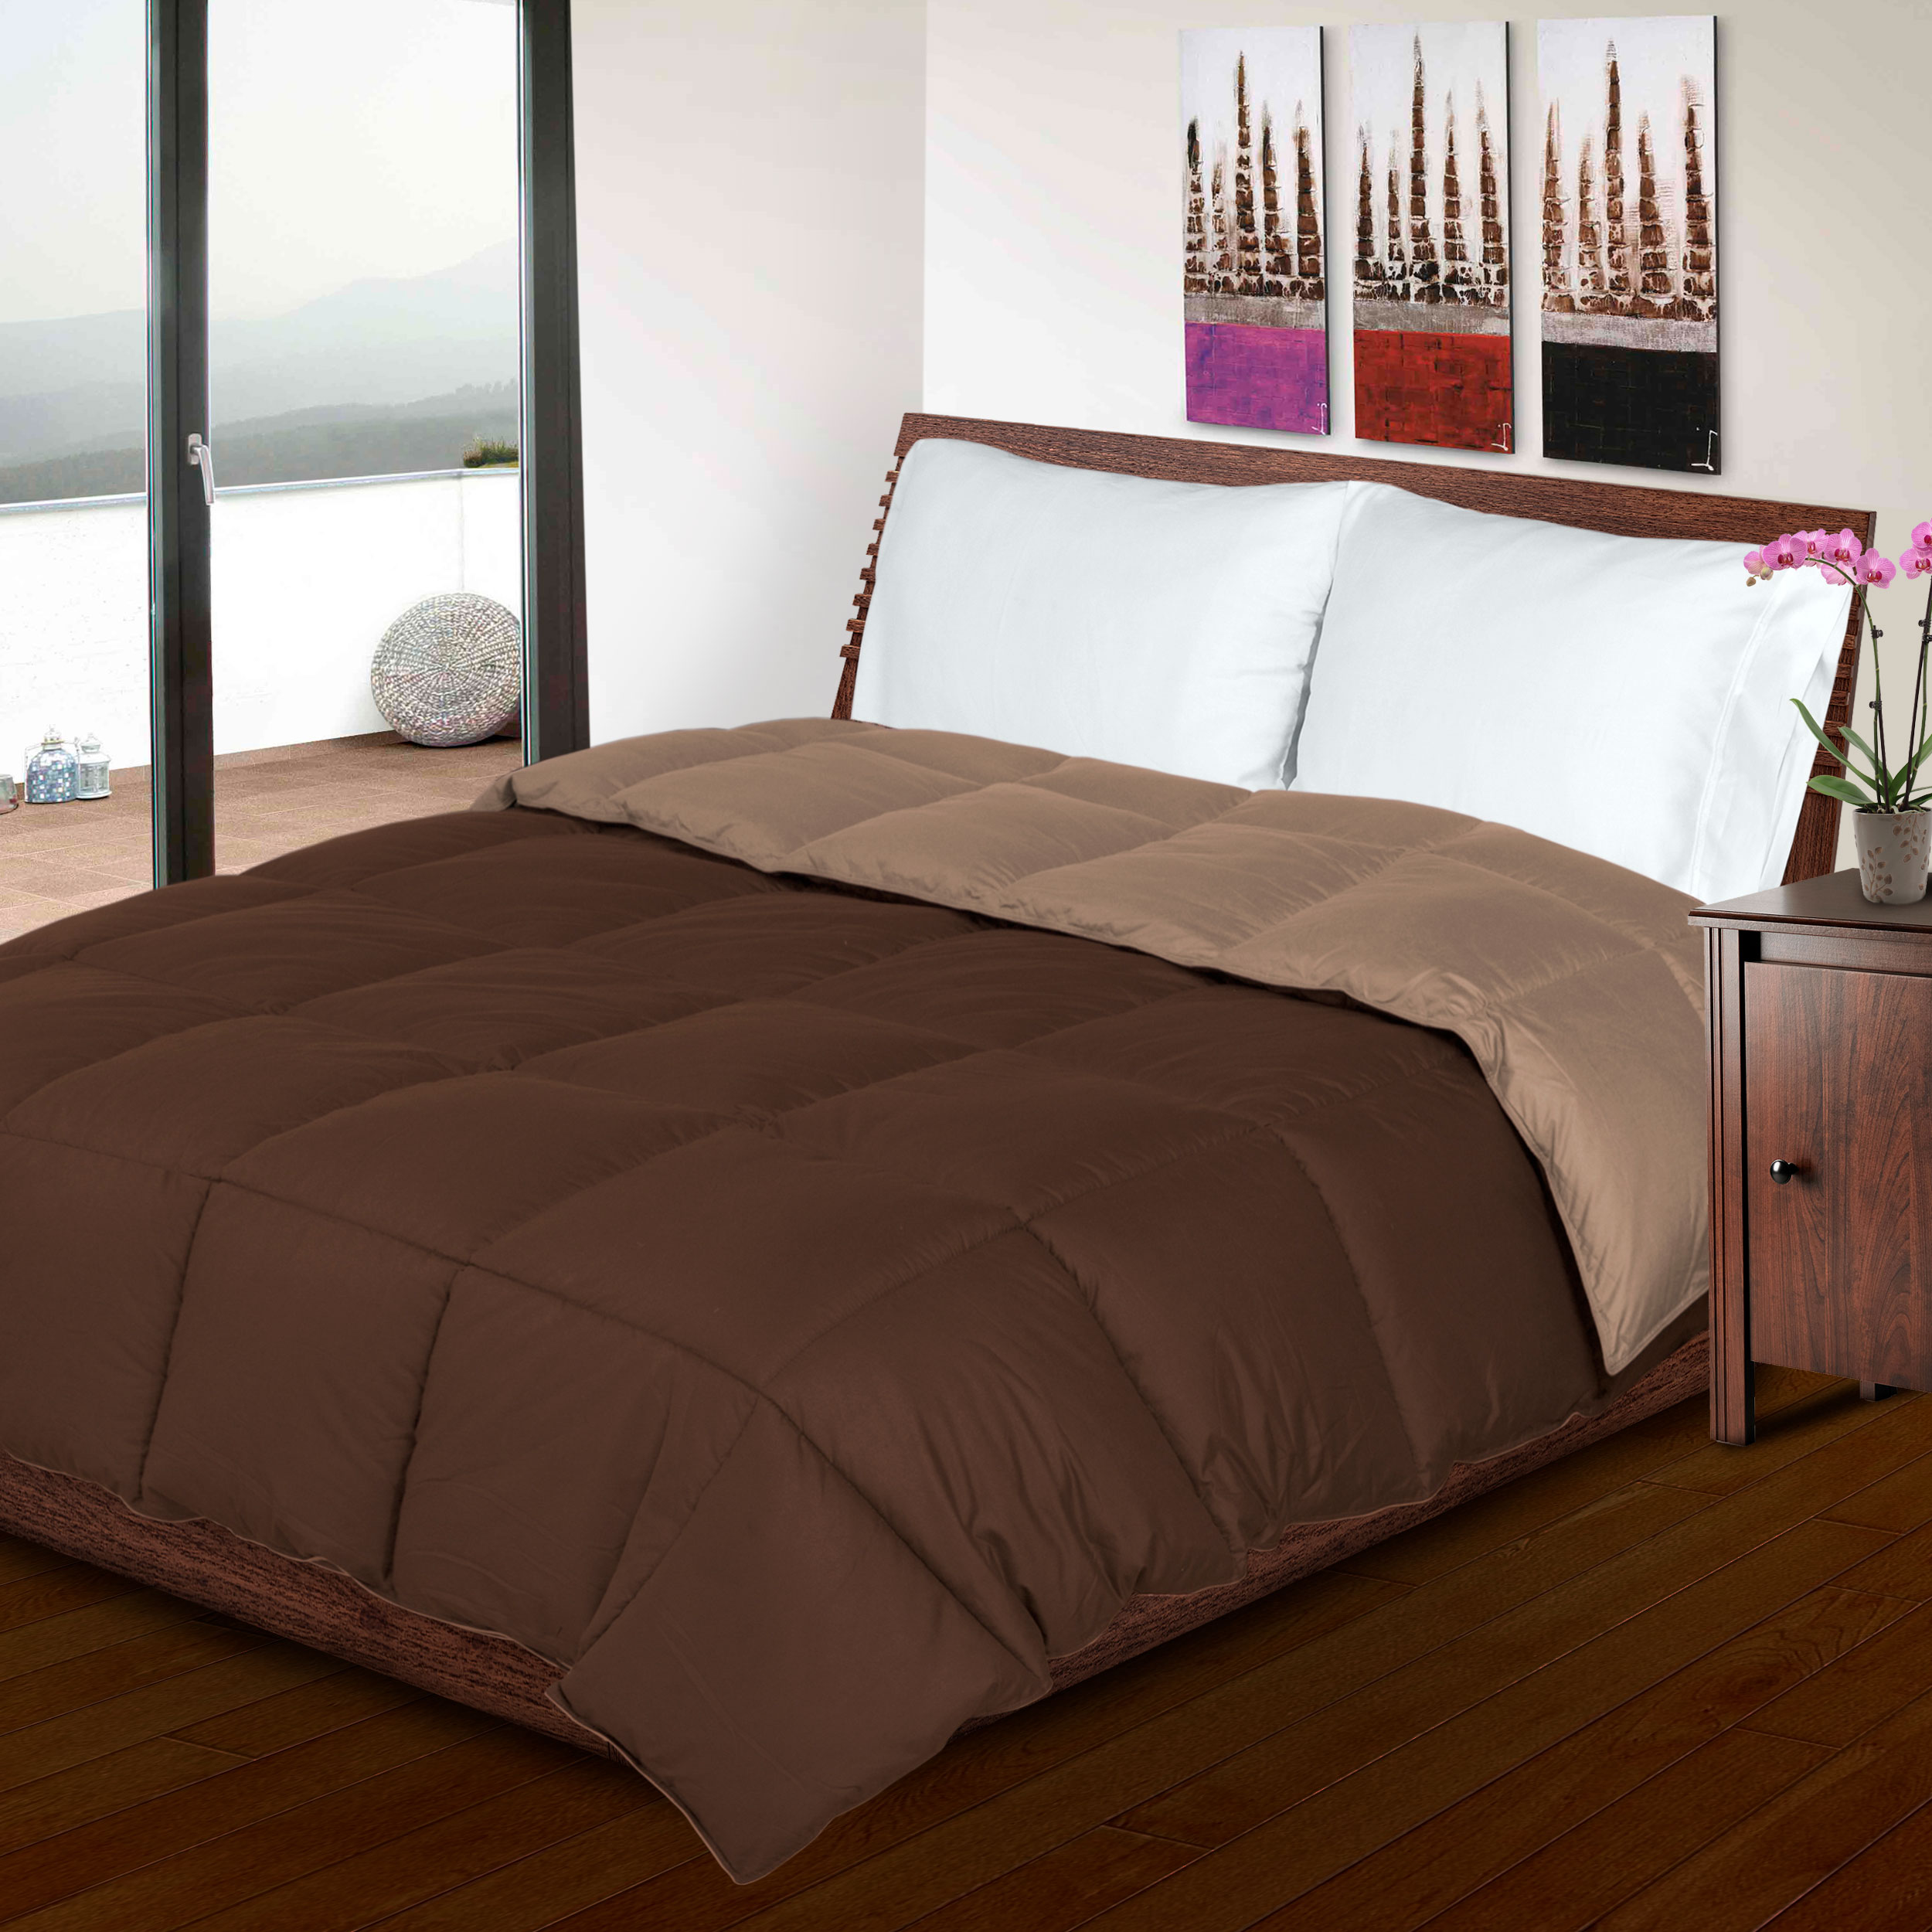 Superior Down Alternative Reversible Comforter, King, Taupe/ Choco - image 1 of 2